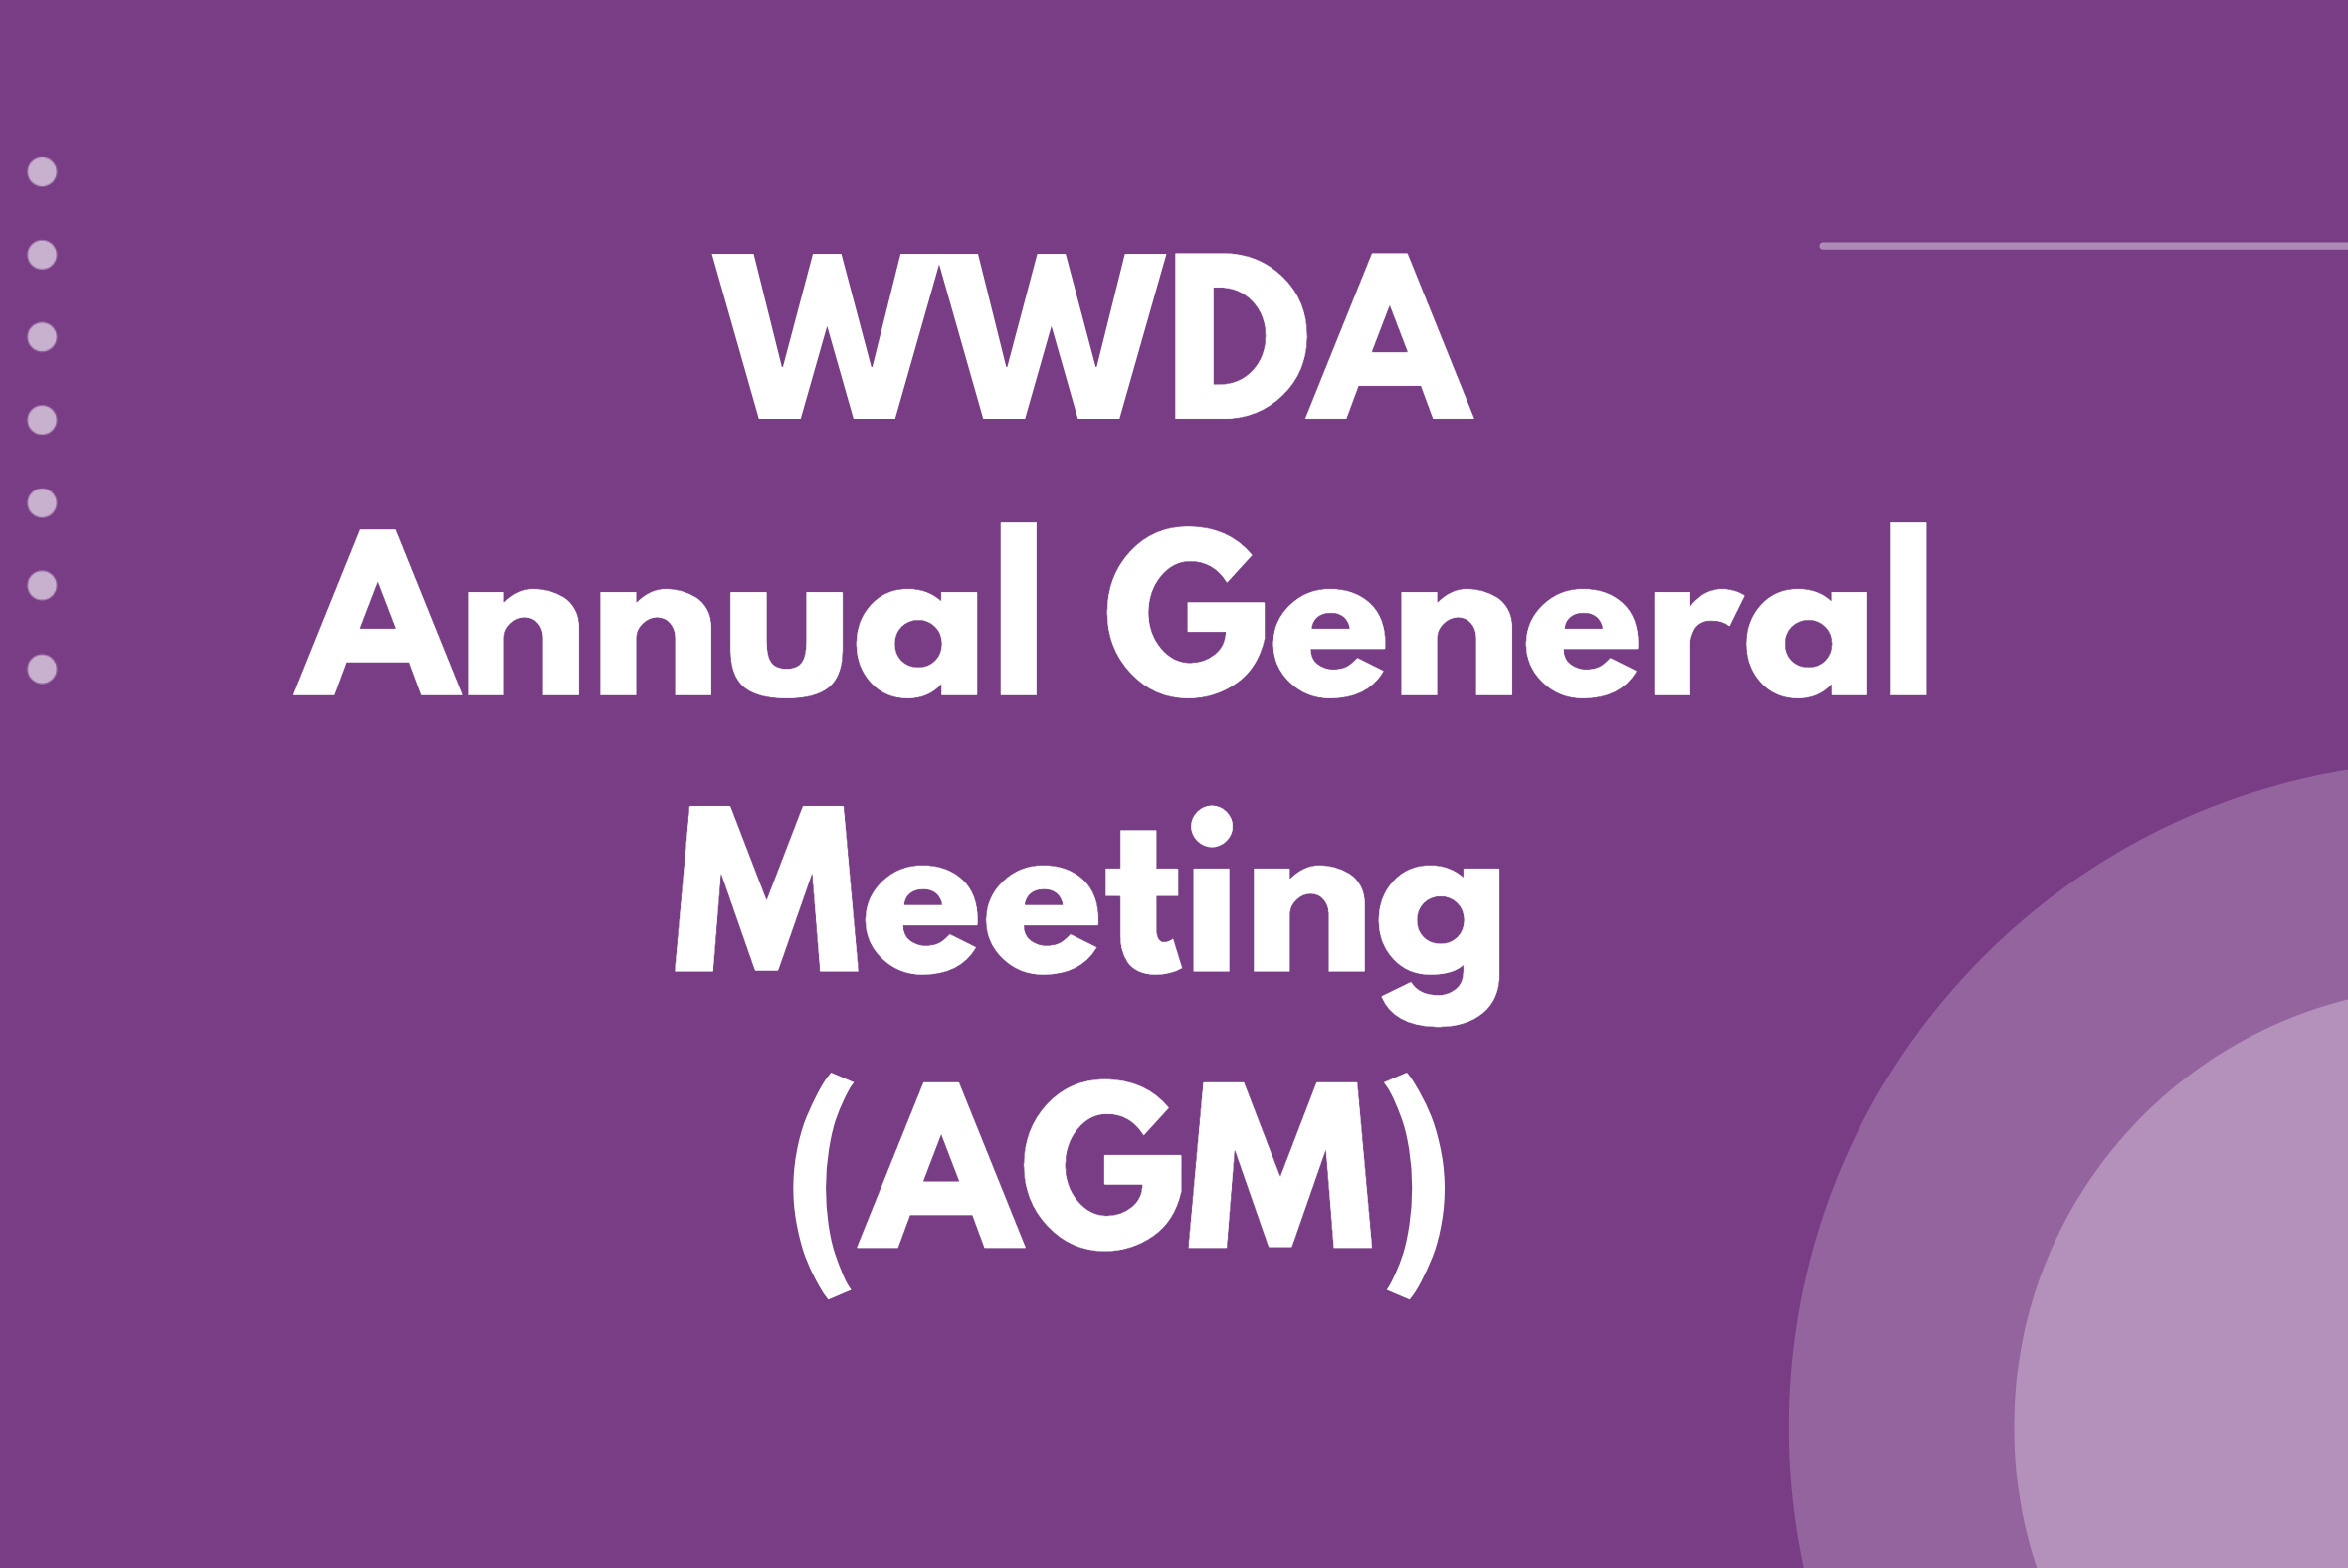 Purple background with white text that reads WWDA Annual General Meeting AGM